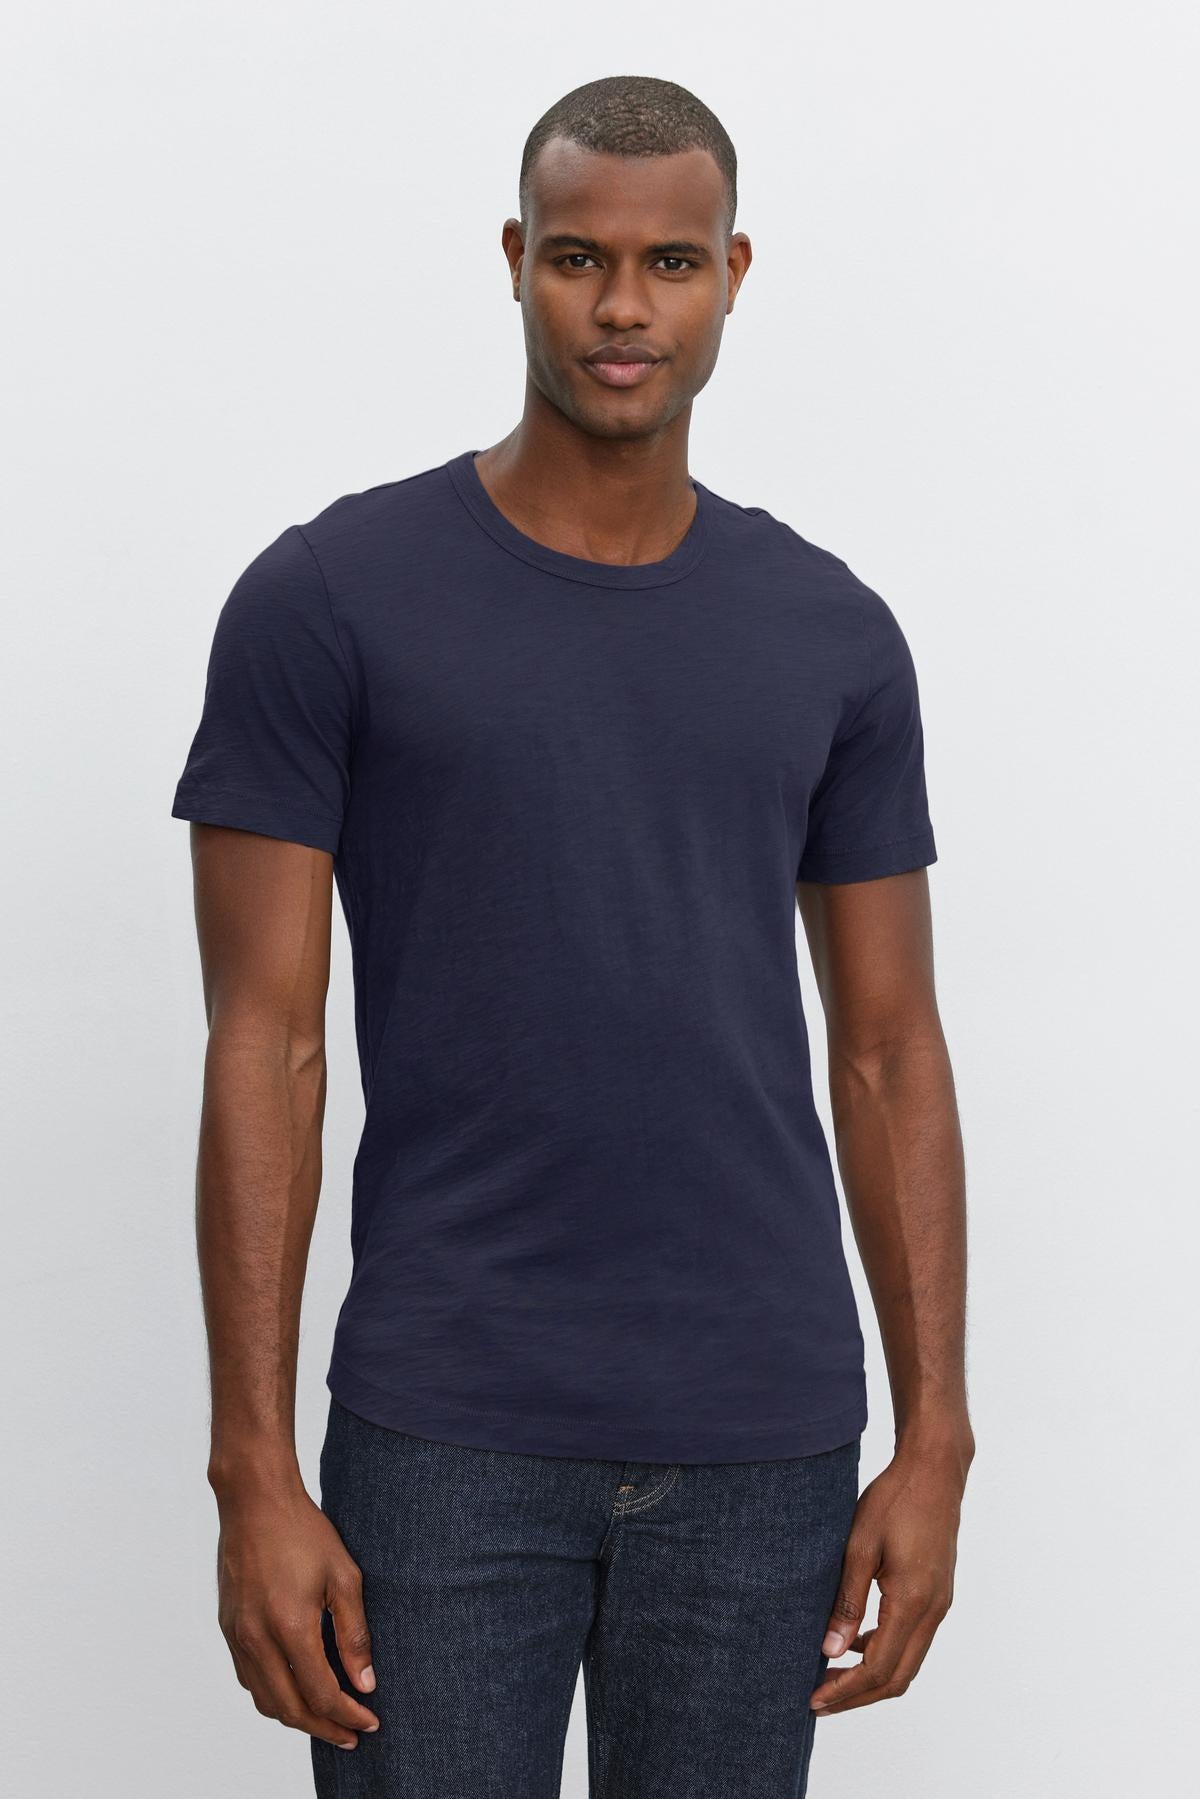 A man wearing a Velvet by Graham & Spencer AMARO CREW NECK SLUB TEE and jeans.-36273921917121